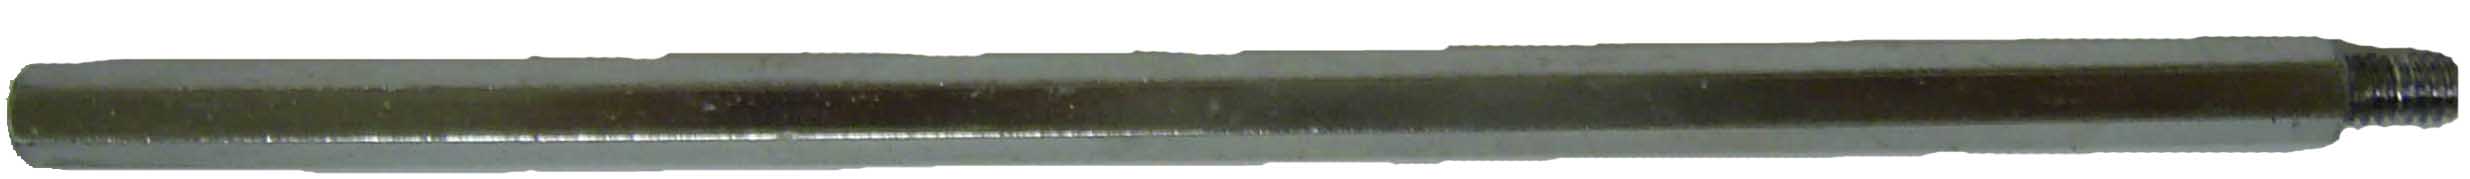 15a-002 wp mounting bolt